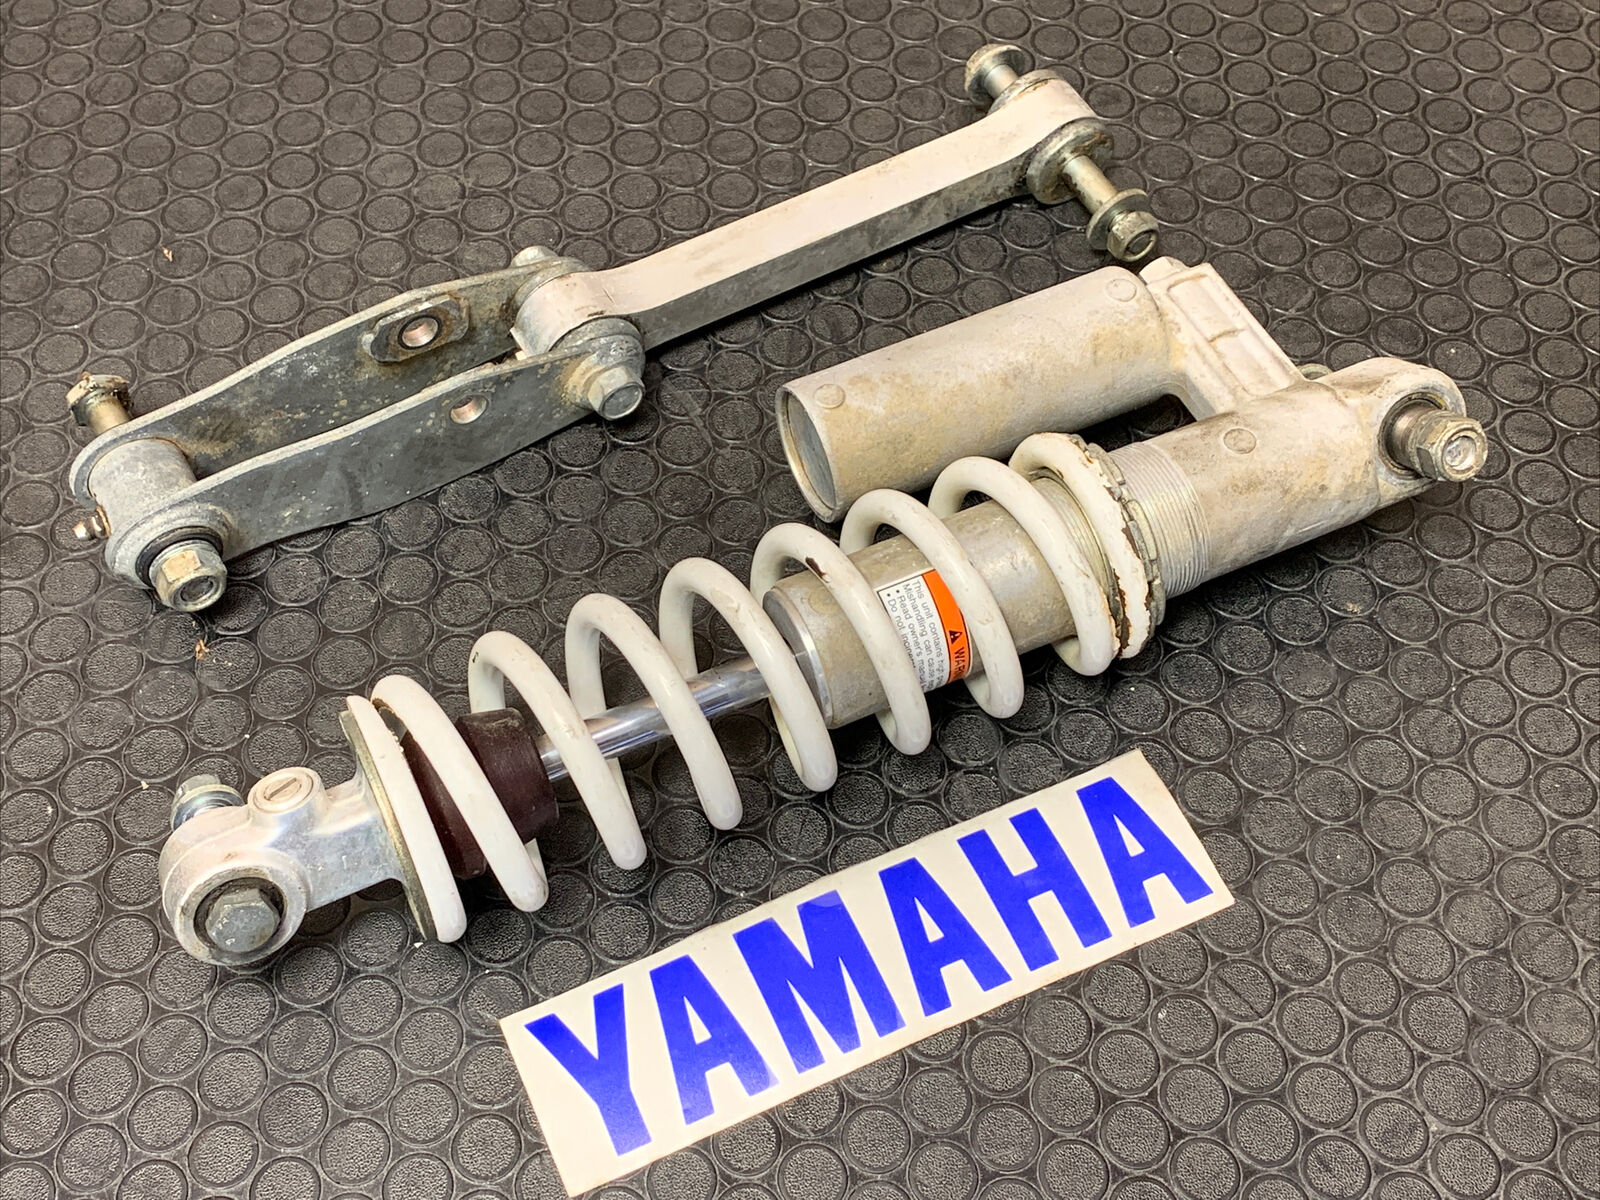 06-20 Yamaha Raptor 700 Rear White Spring Fixed price for sale Shock Coil Max 74% OFF